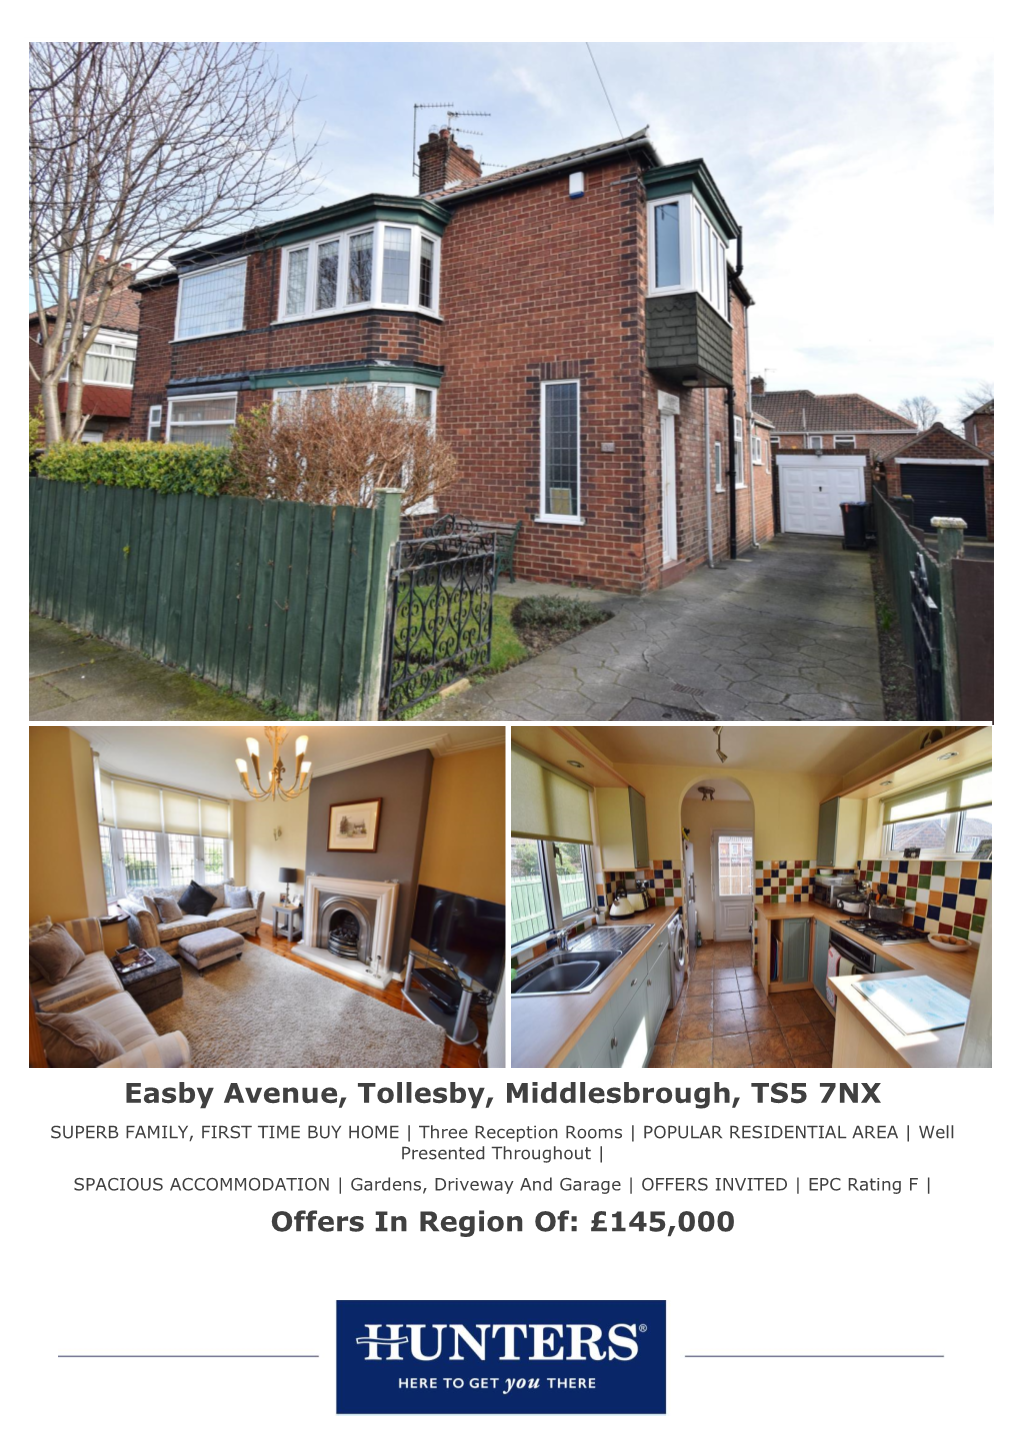 Easby Avenue, Tollesby, Middlesbrough, TS5 7NX Offers in Region Of